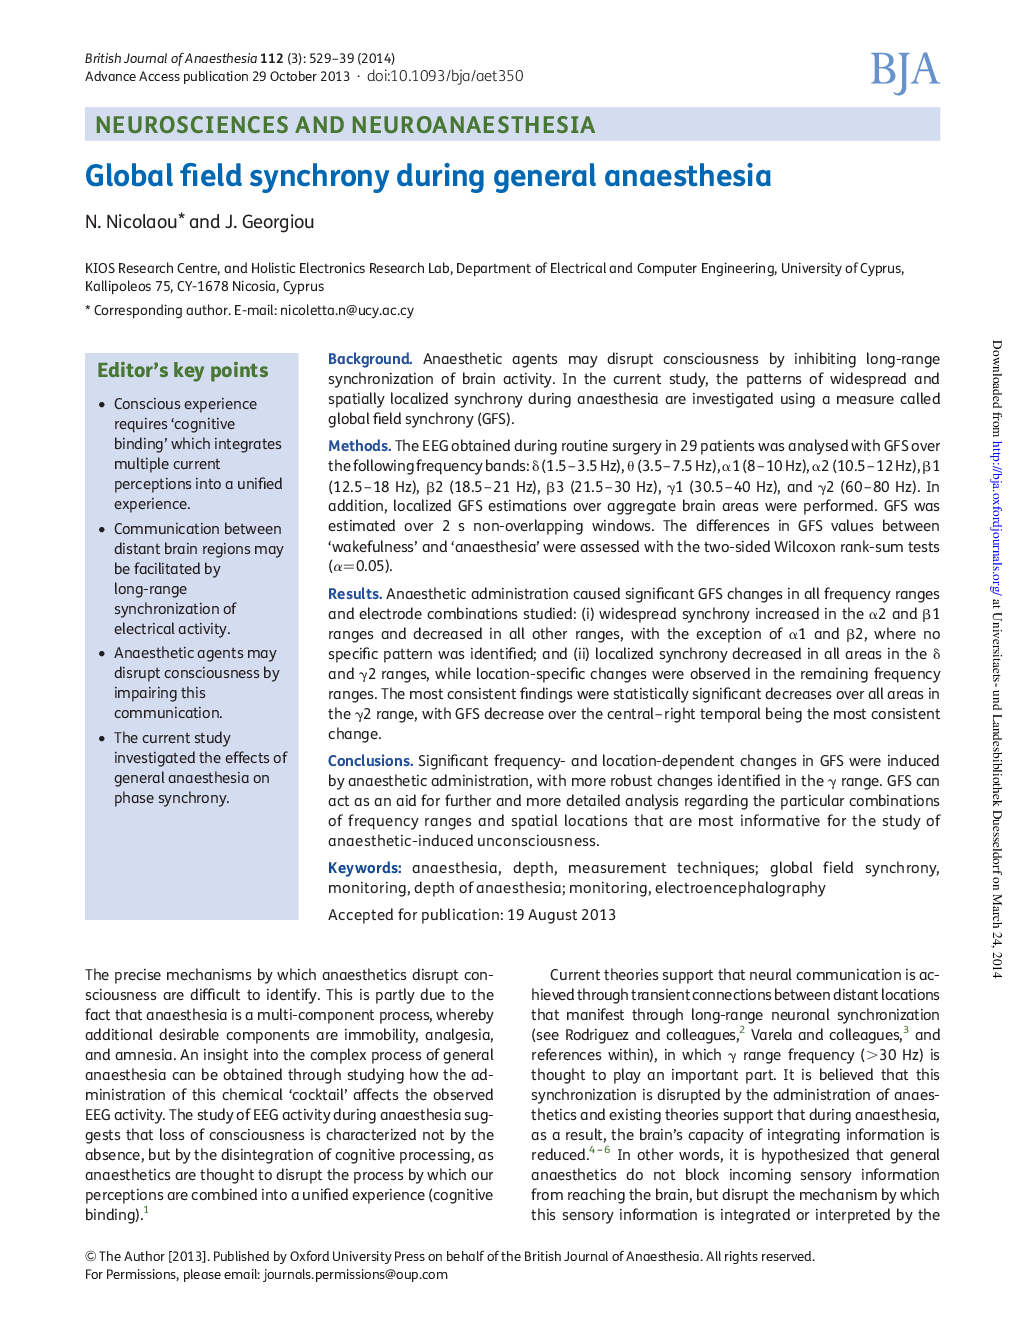 Global field synchrony during general anaesthesia